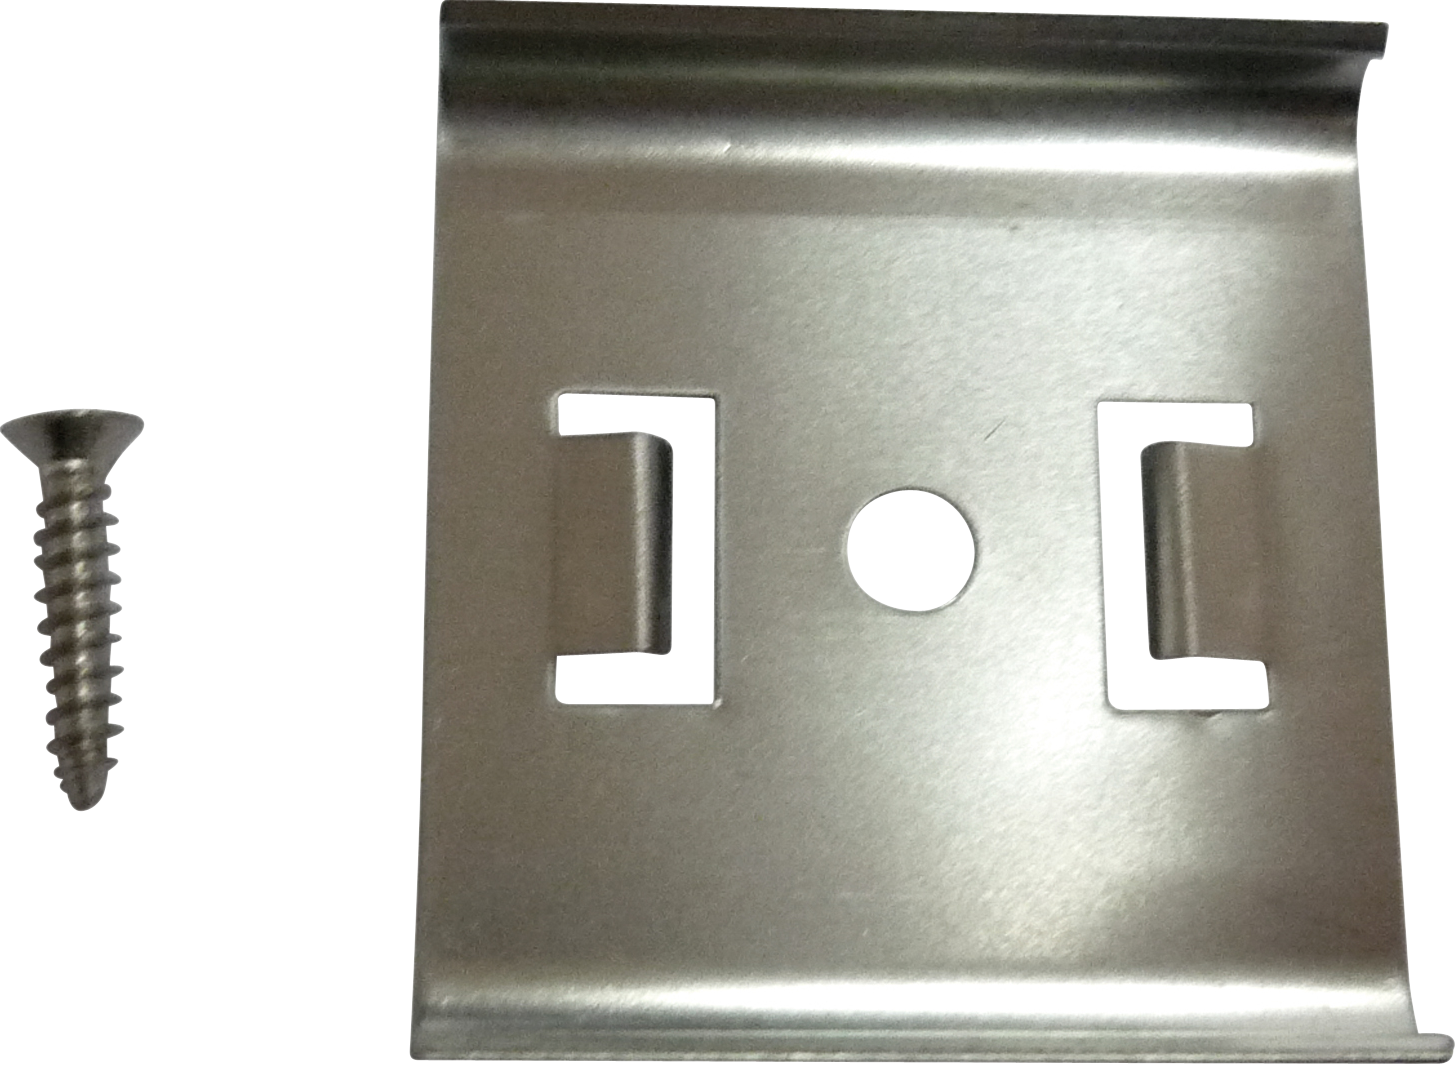 Metal Mounting Clip Comes With 2 X Screws For Flat LED Strip - LEDFCLIP 